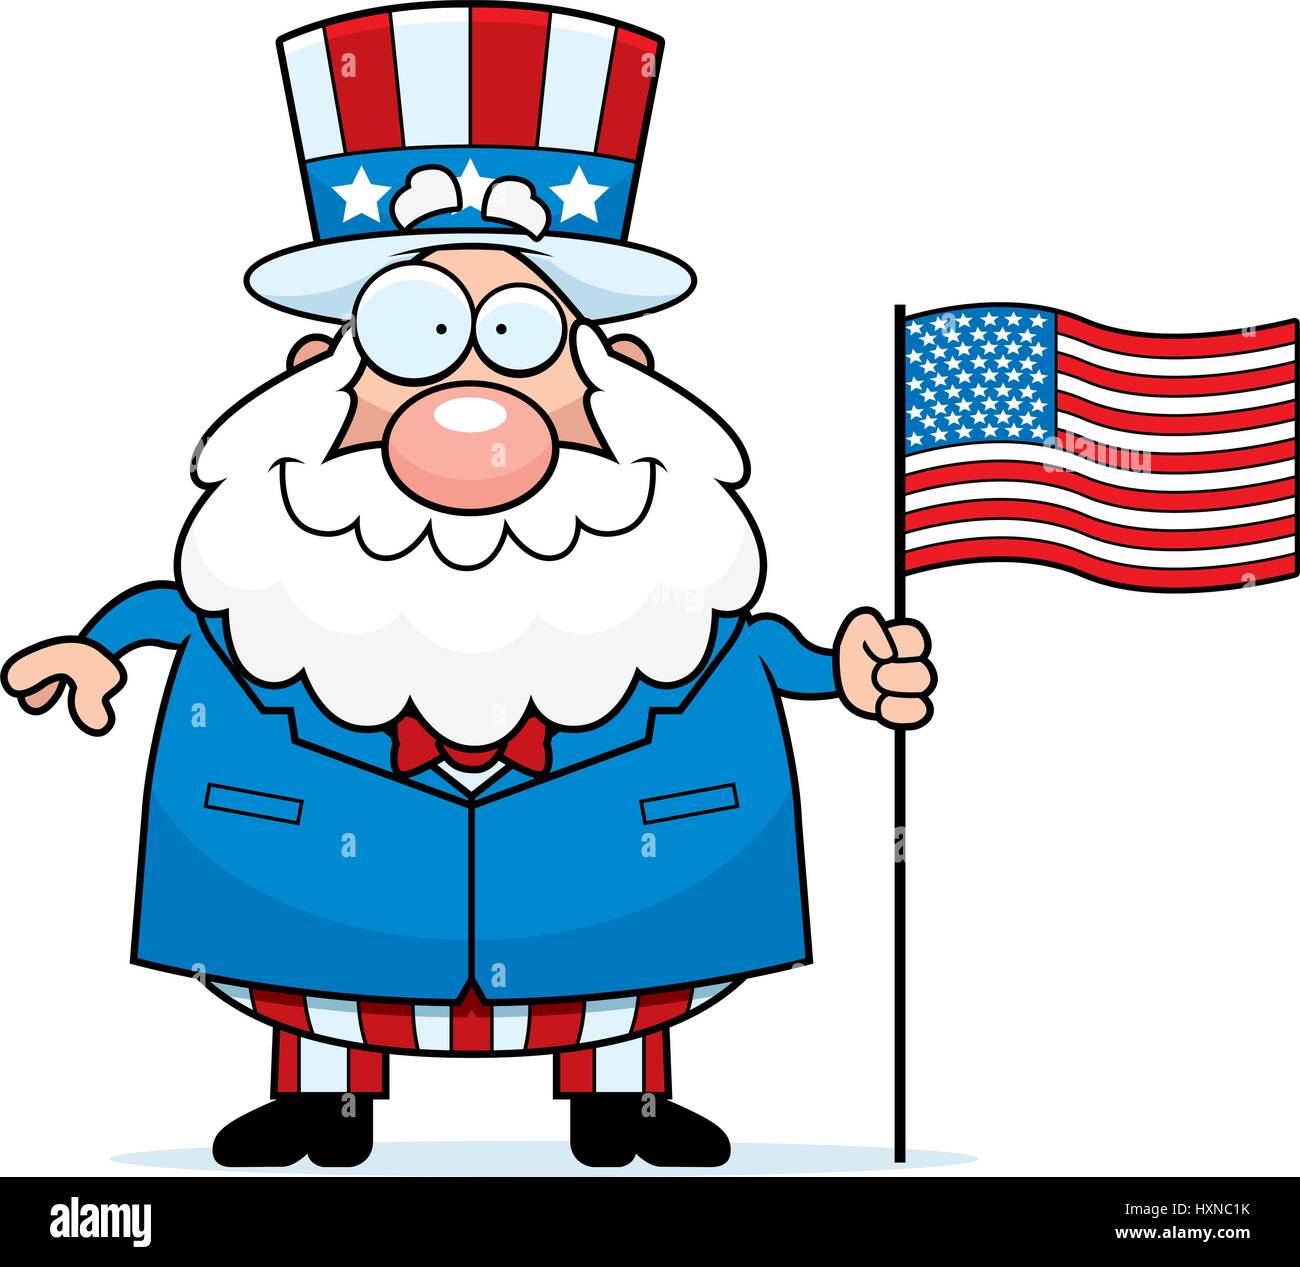 A cartoon illustration of a patriotic man with an American flag